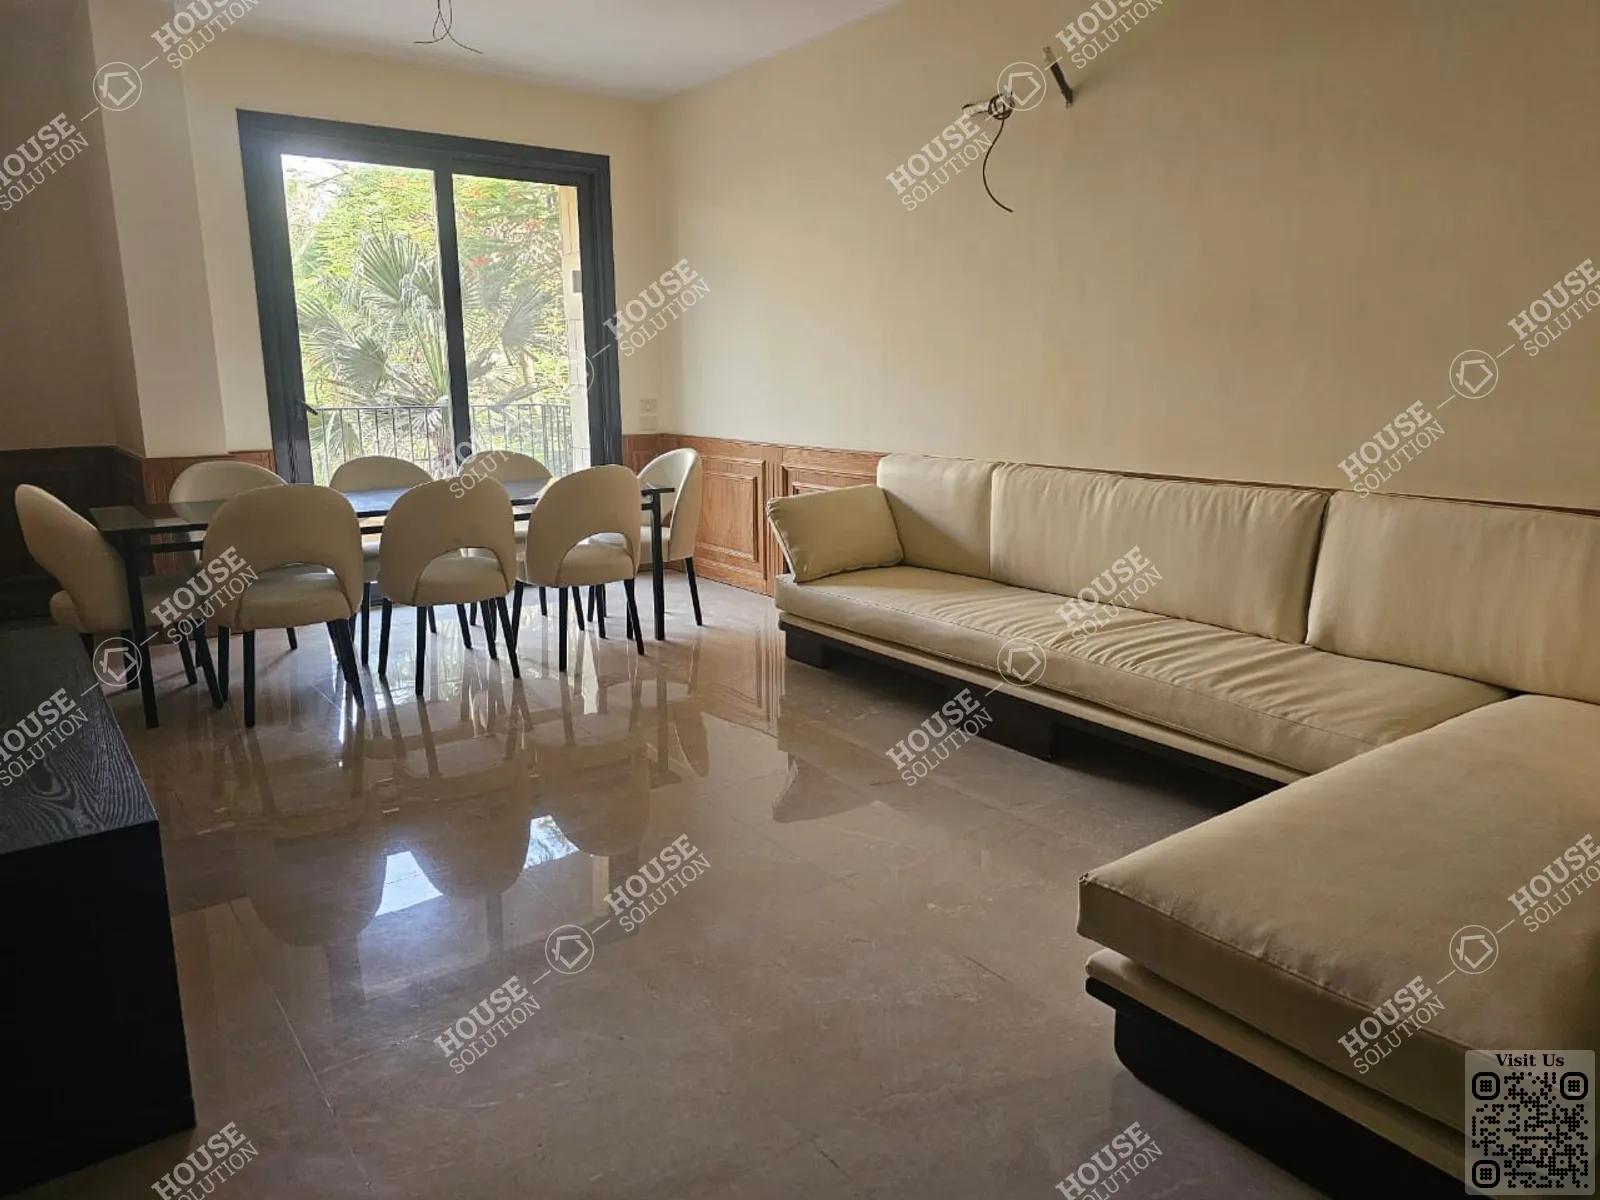 RECEPTION  @ Apartments For Rent In Maadi Maadi Sarayat Area: 125 m² consists of 2 Bedrooms 3 Bathrooms Modern furnished 5 stars #5914-0